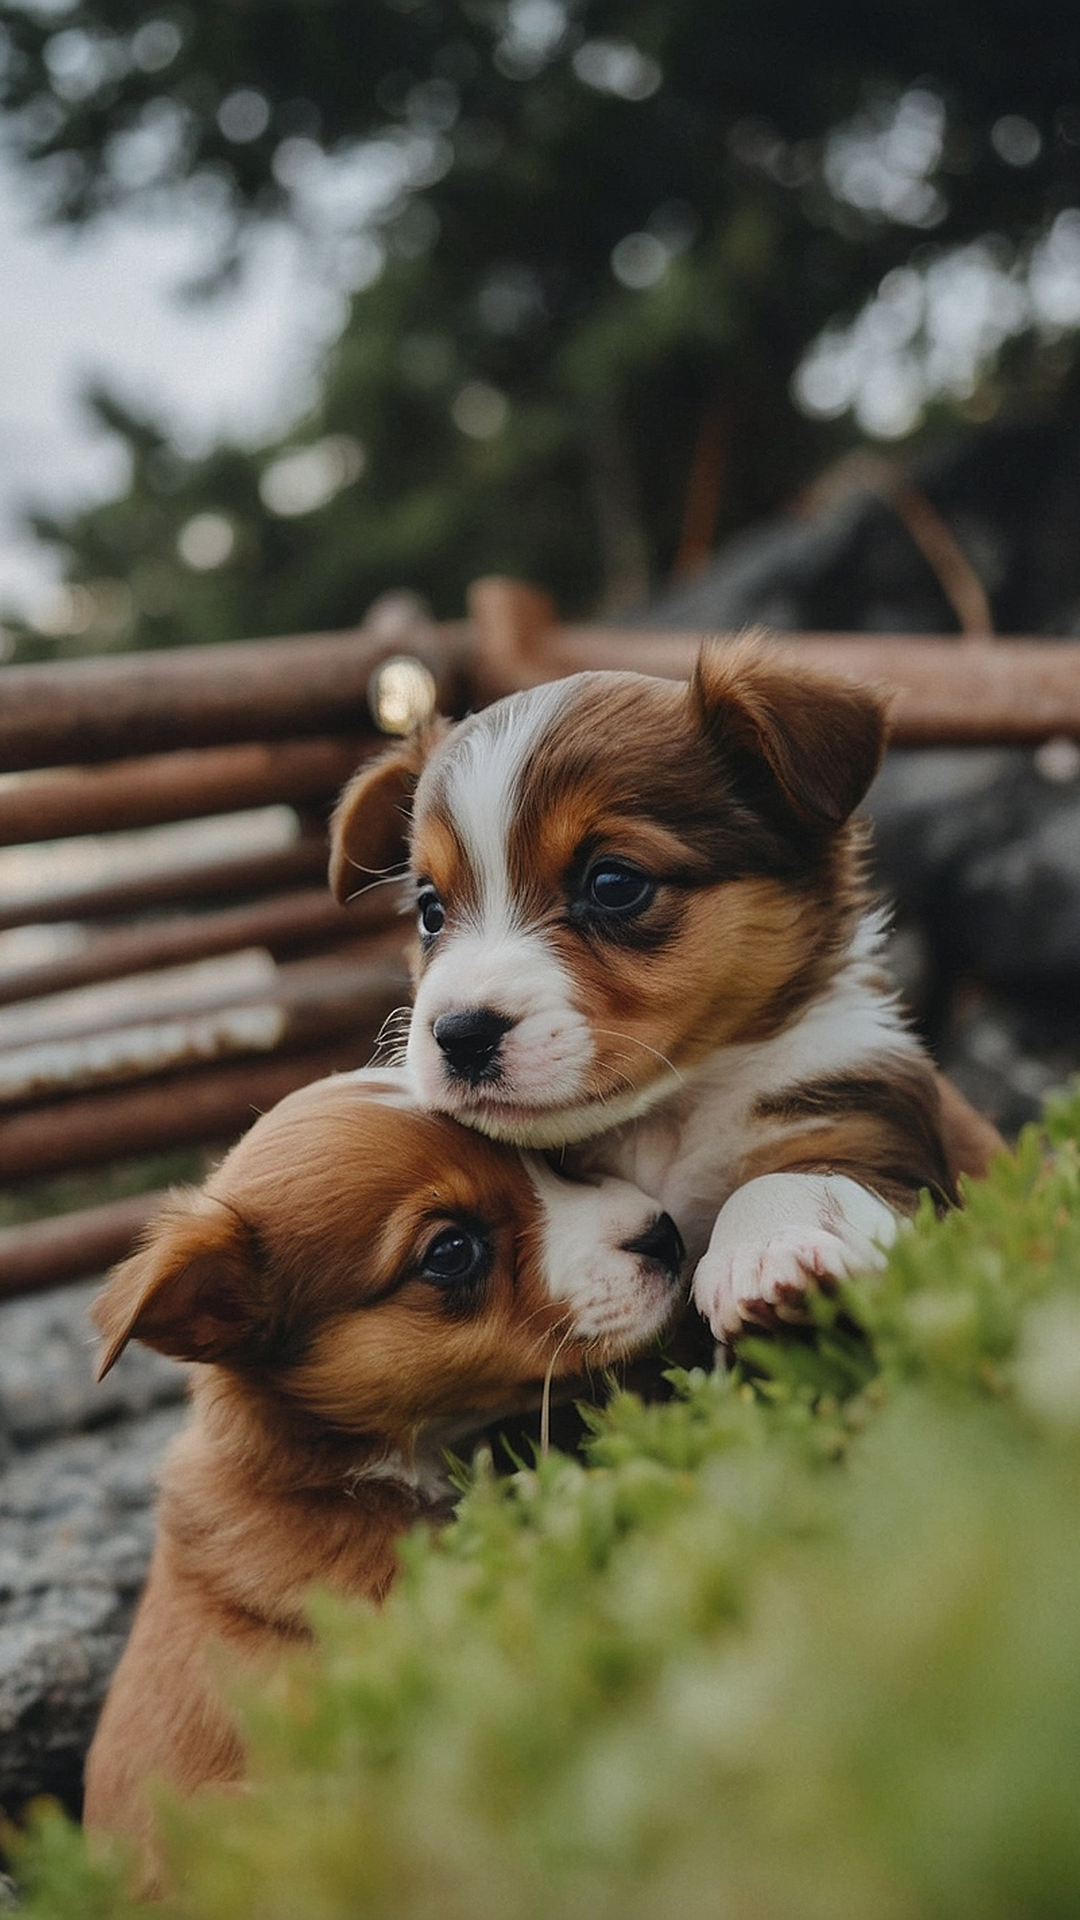 Snuggle Buddies: The Cutest Puppies